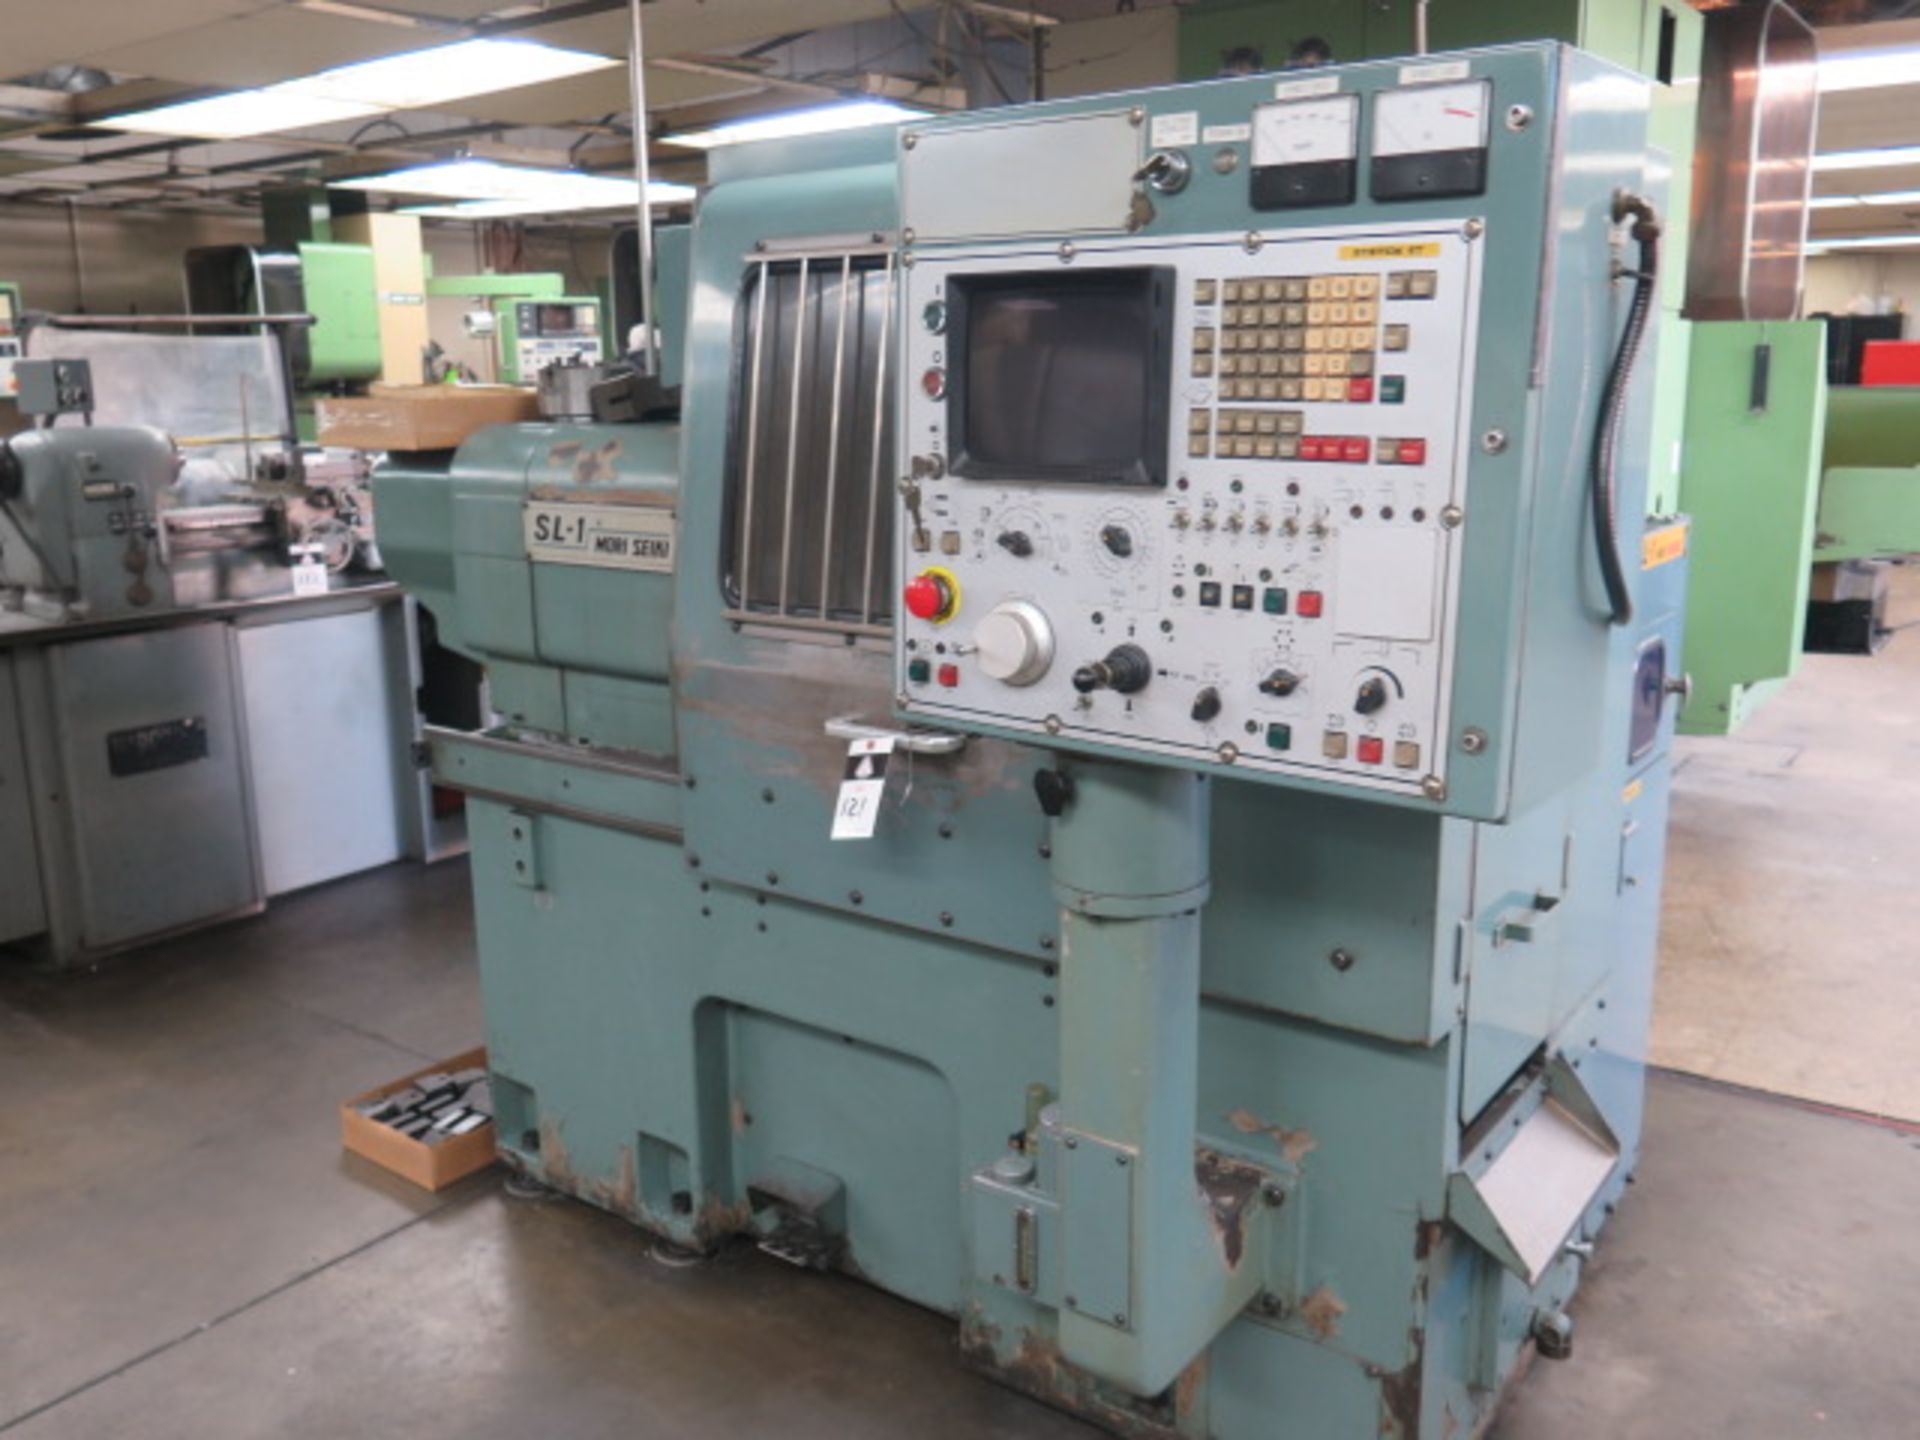 Mori Seiki SL-1H CNC Turning Center s/n 1168 w/ Fanuc 6T Controls, 8-Station Turret, SOLD AS IS - Image 2 of 14